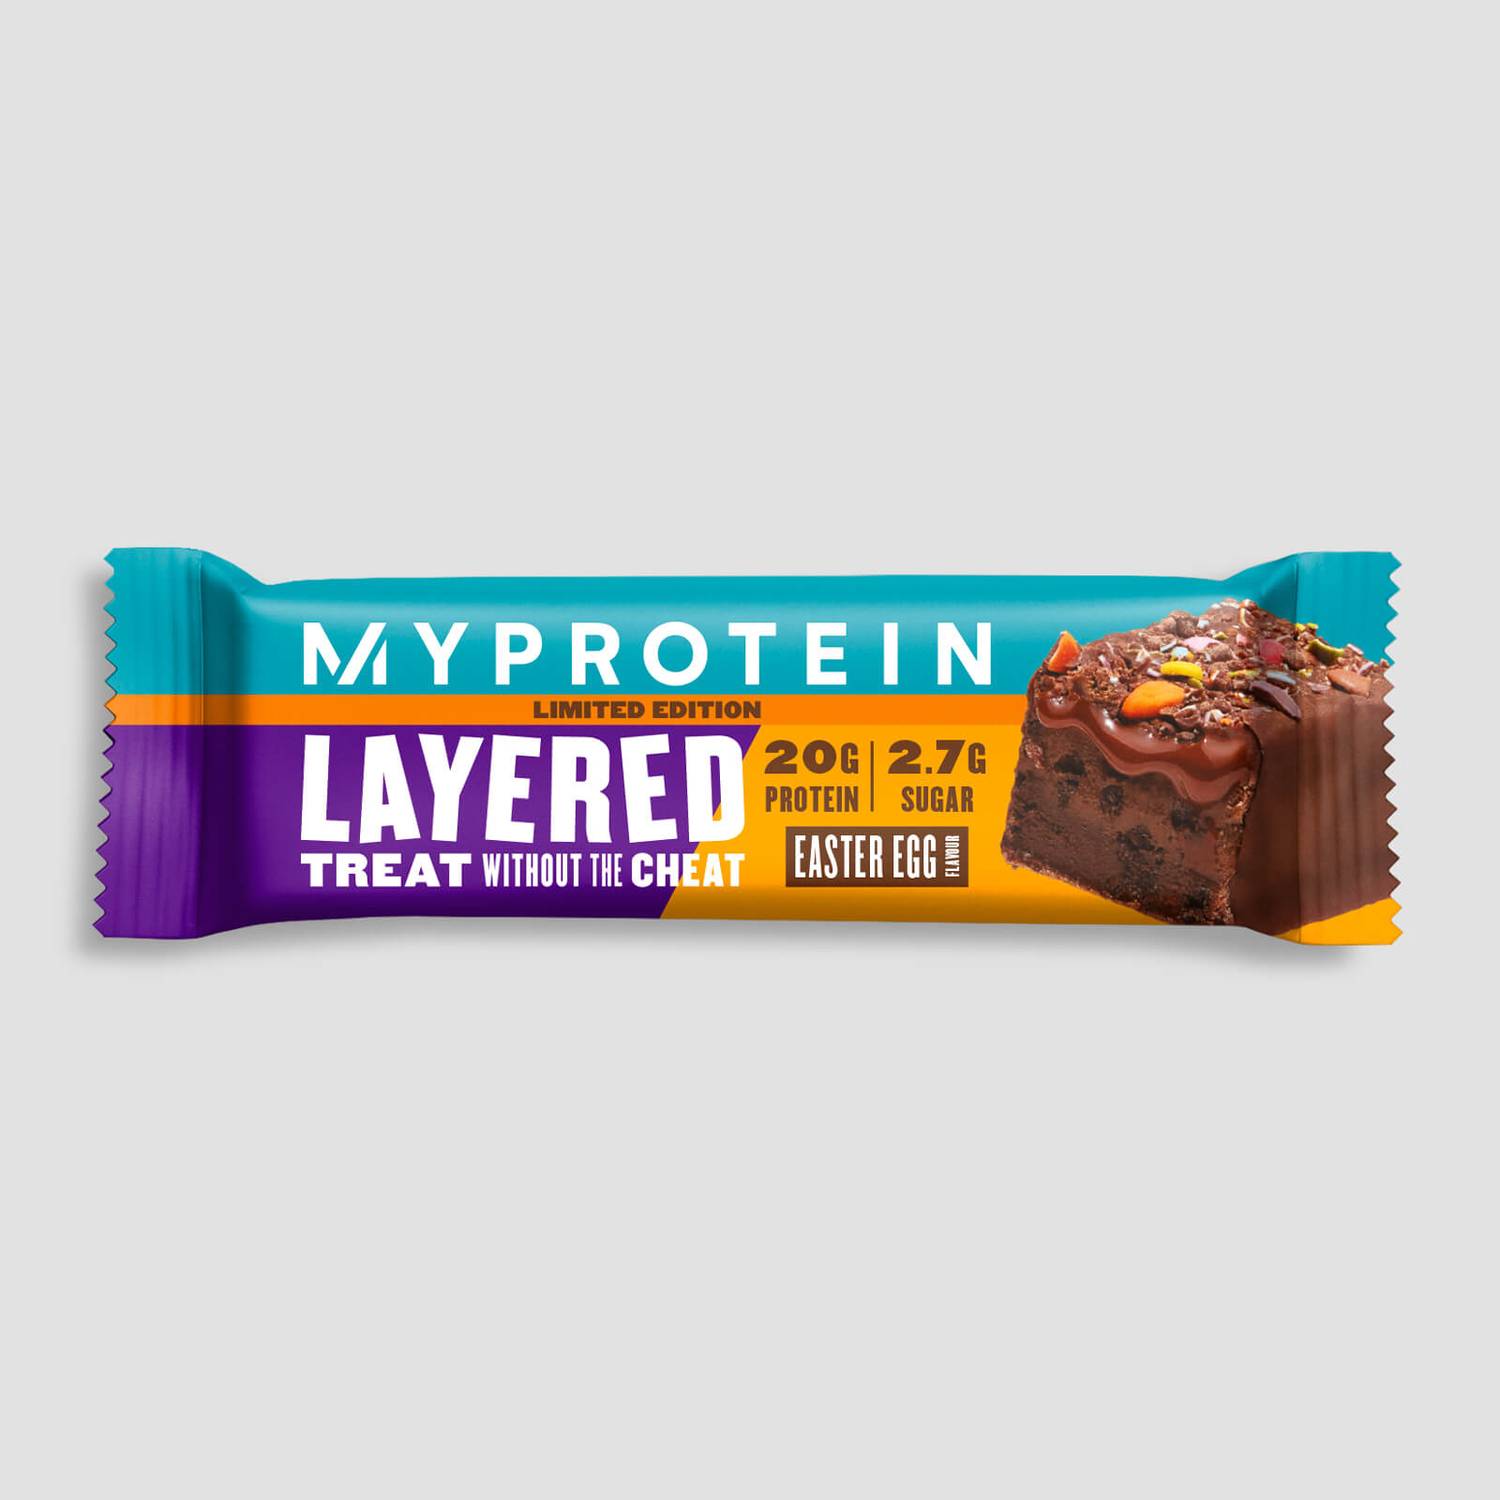 Myprotein Layered Protein Bar - Easter Egg